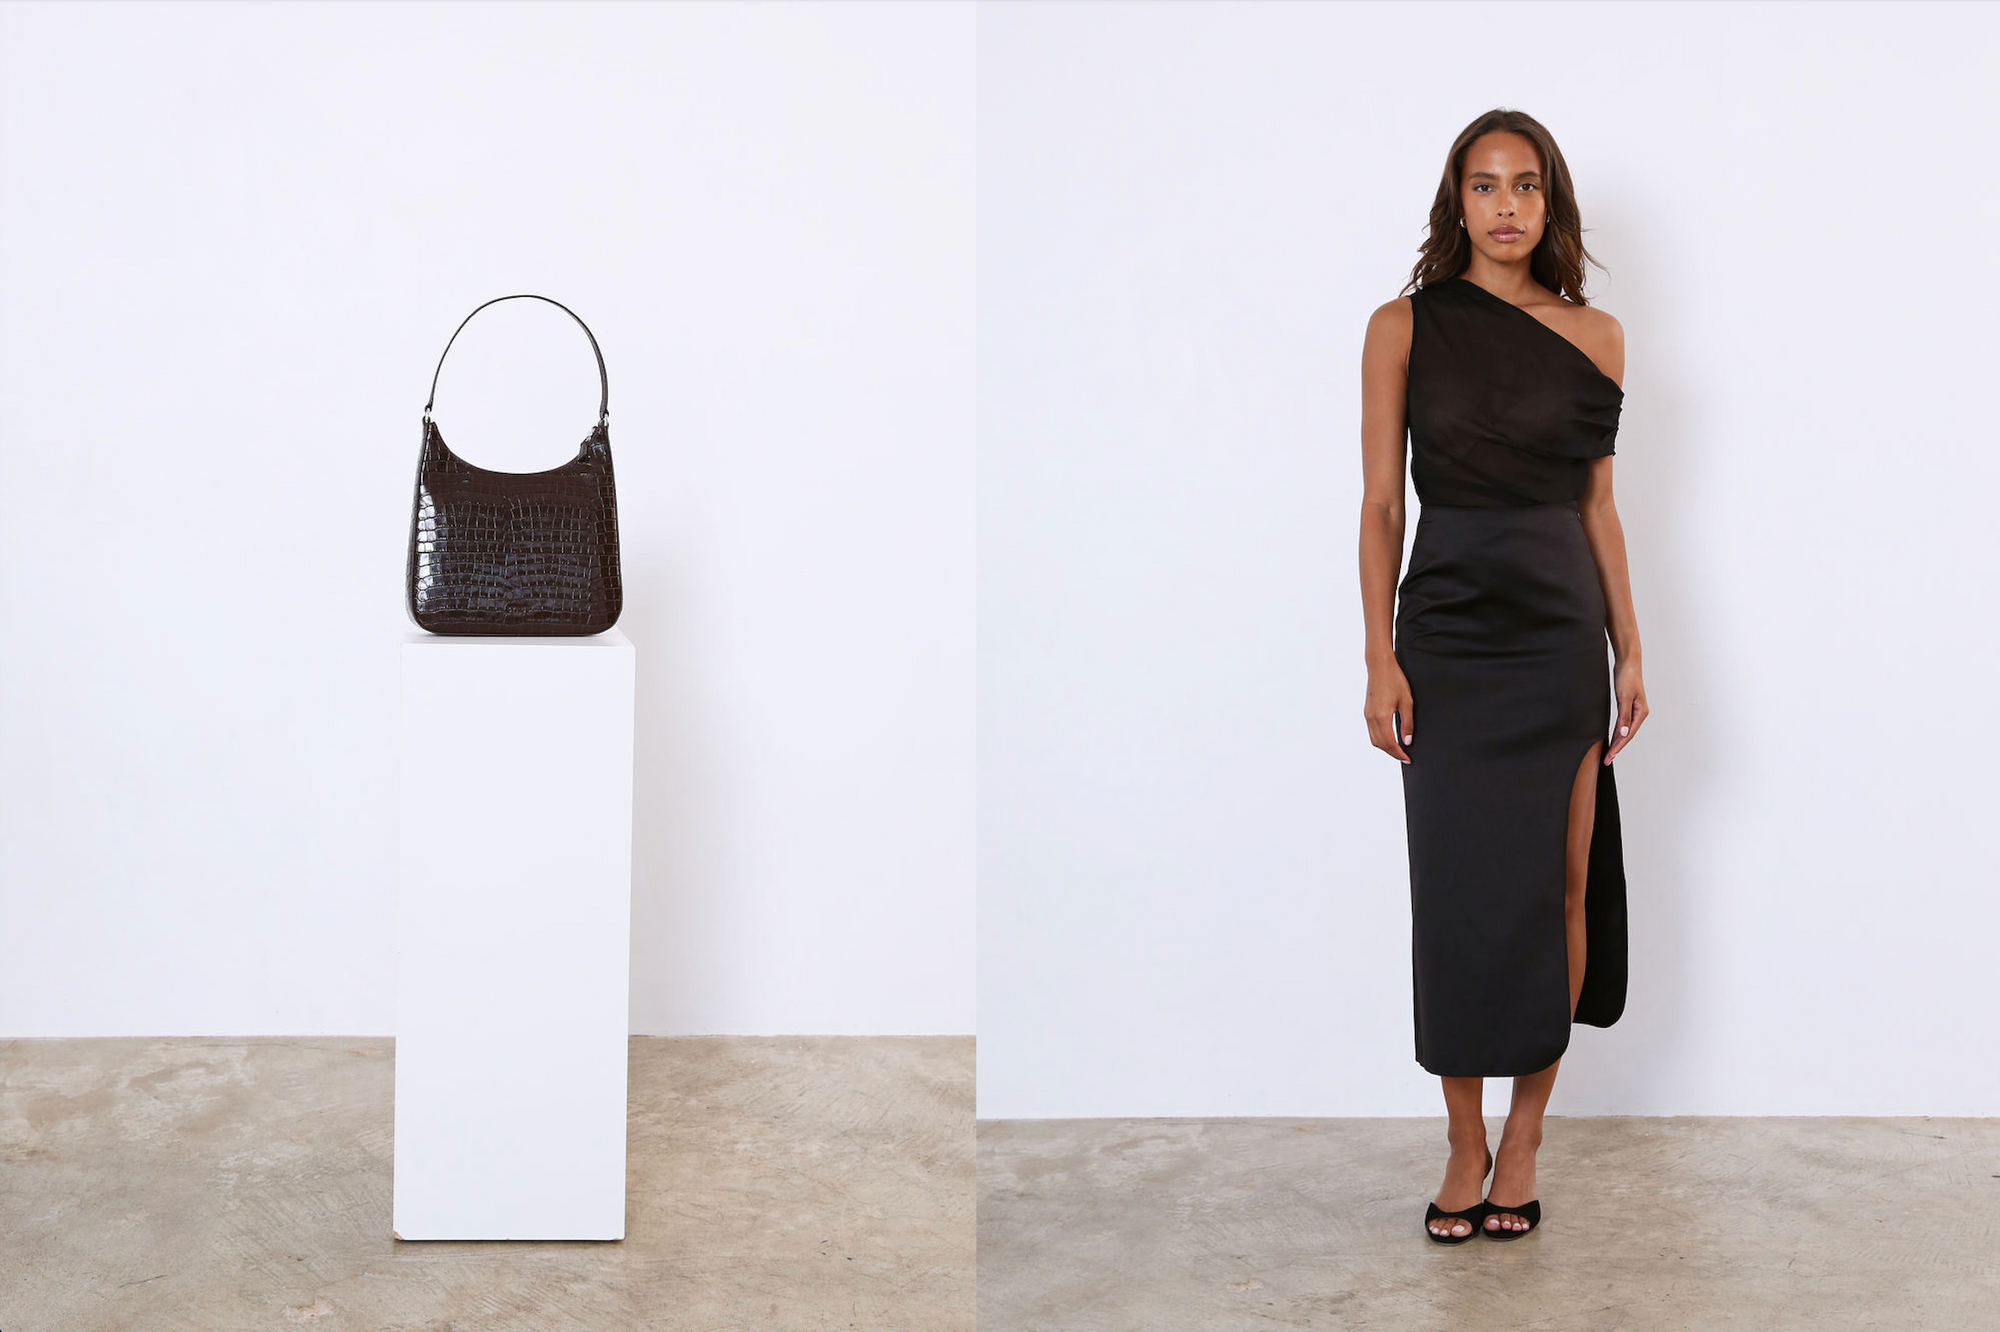 Photo of a purse on a pedestal next to a photo of a woman in a black dress against a white wall.